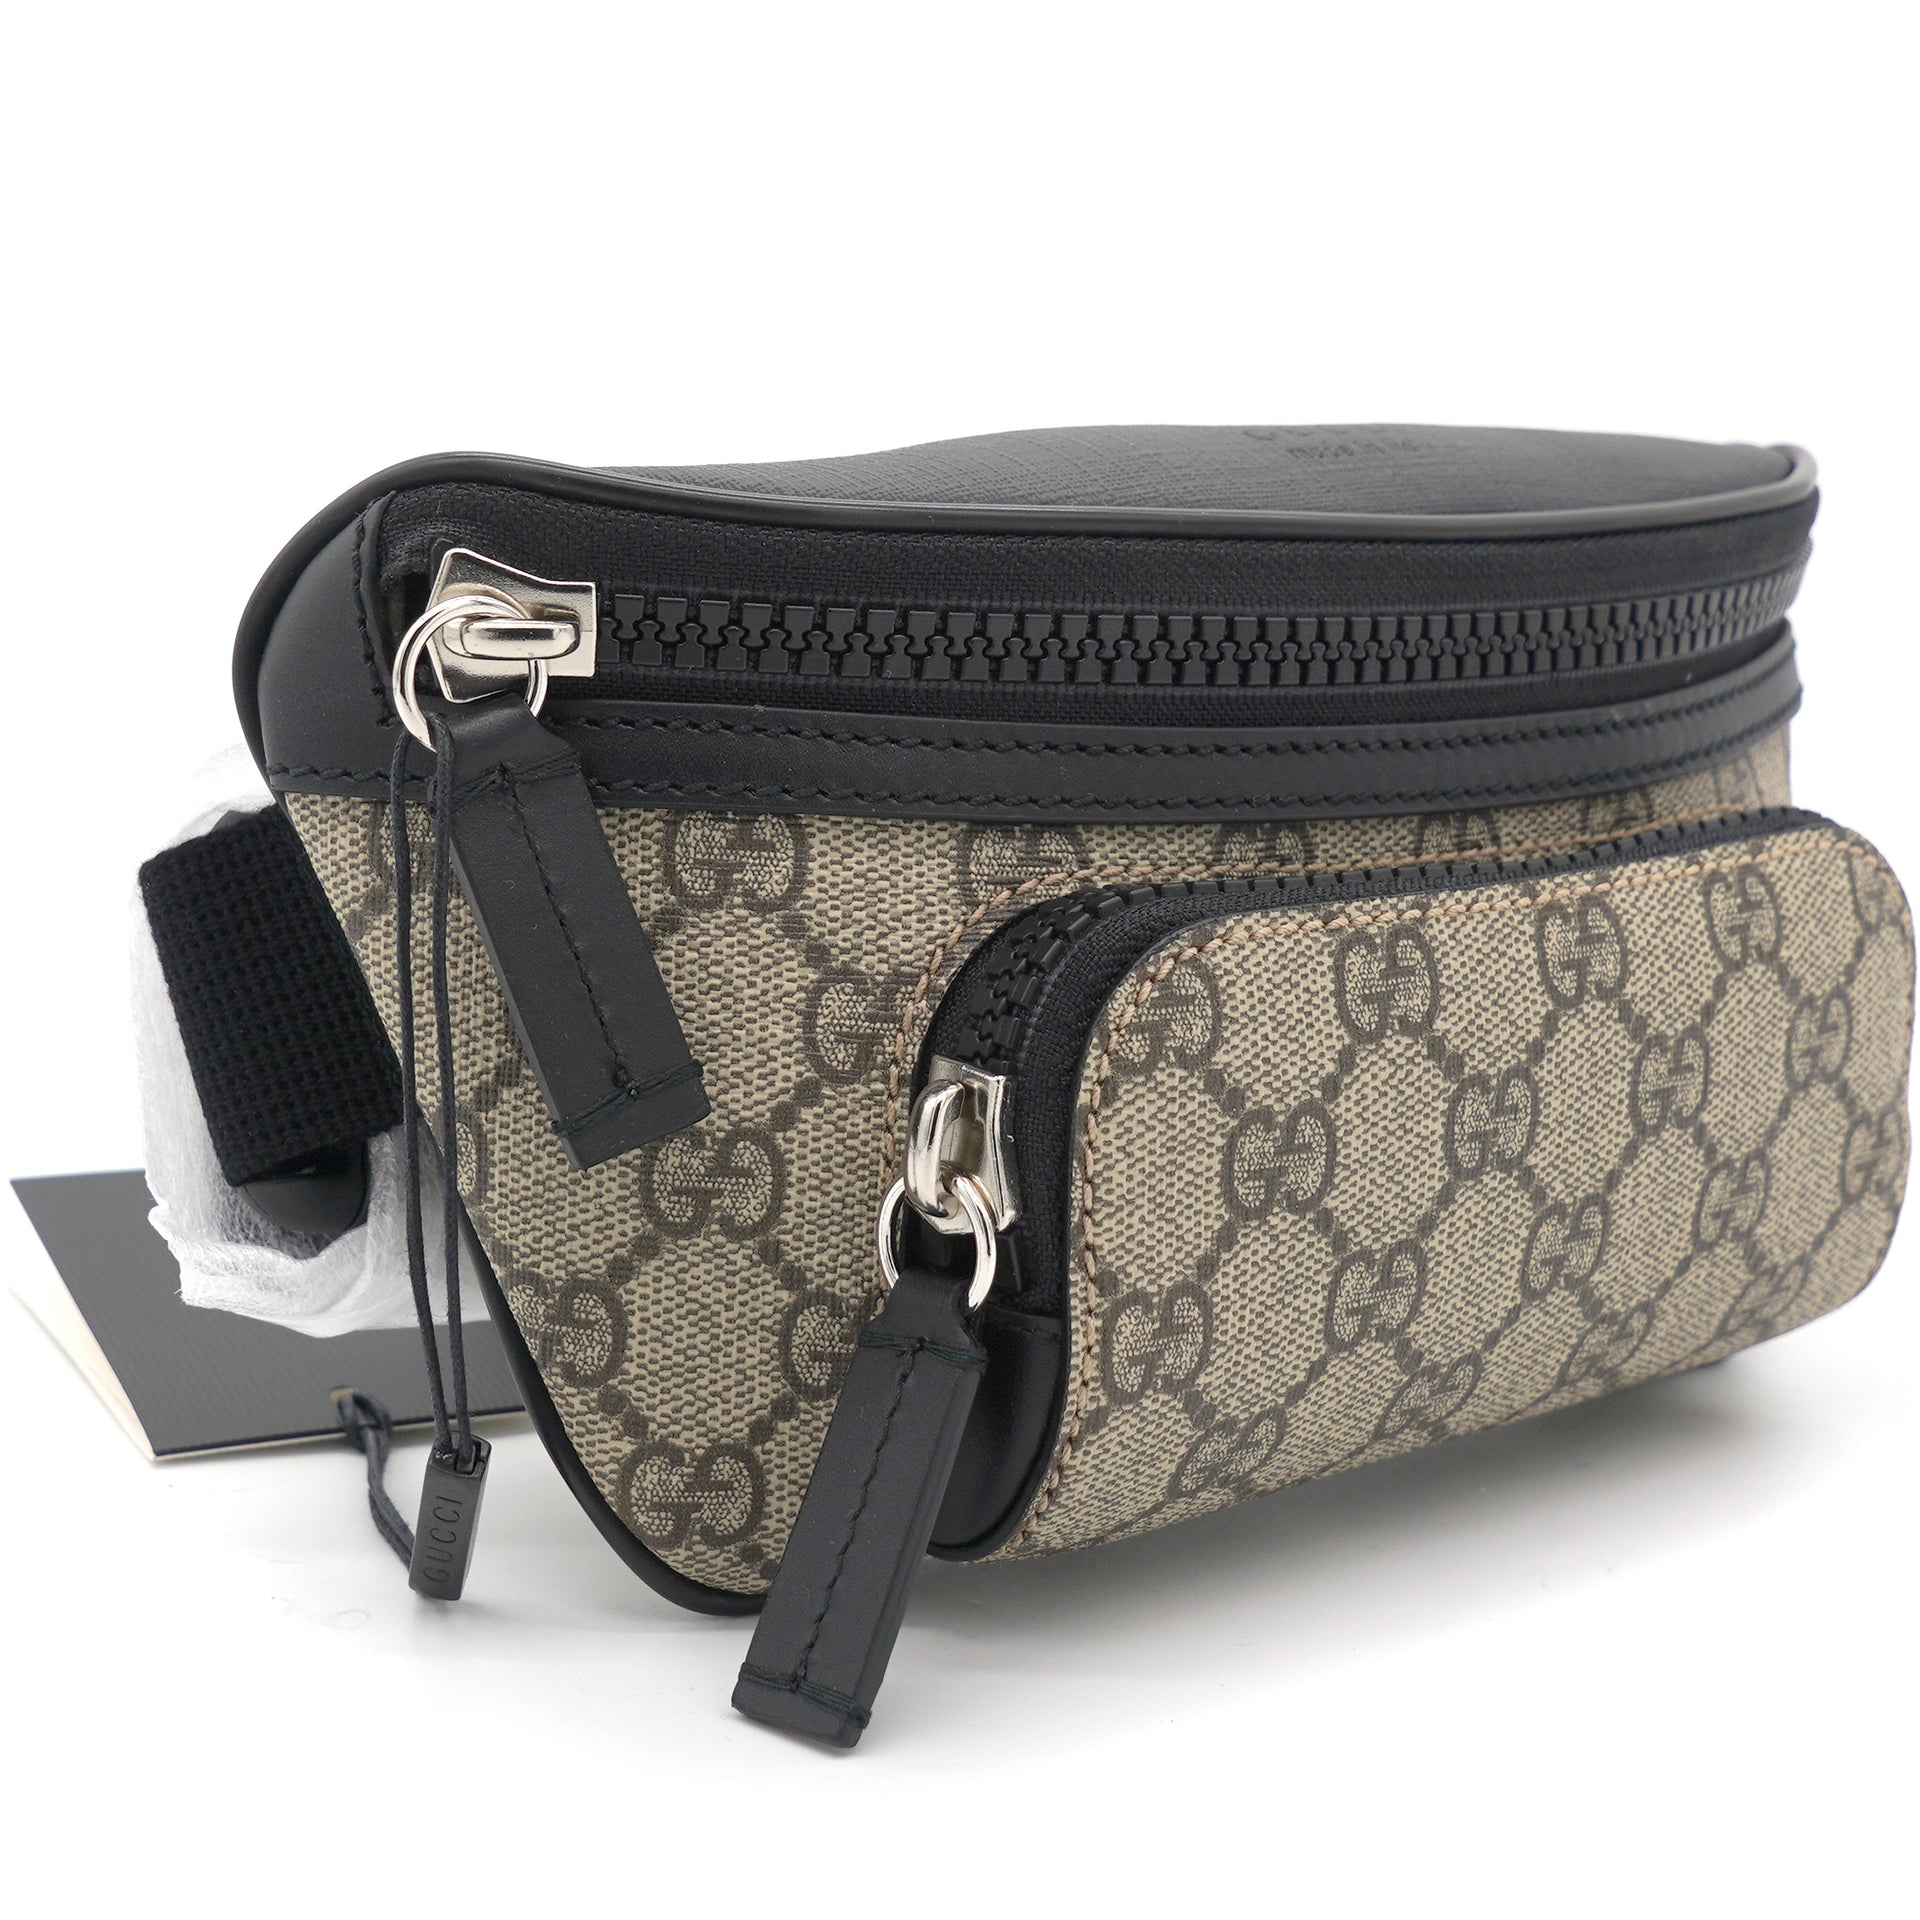 Gucci Courrier Waist Bag GG Supreme Beige/Ebony in Canvas with